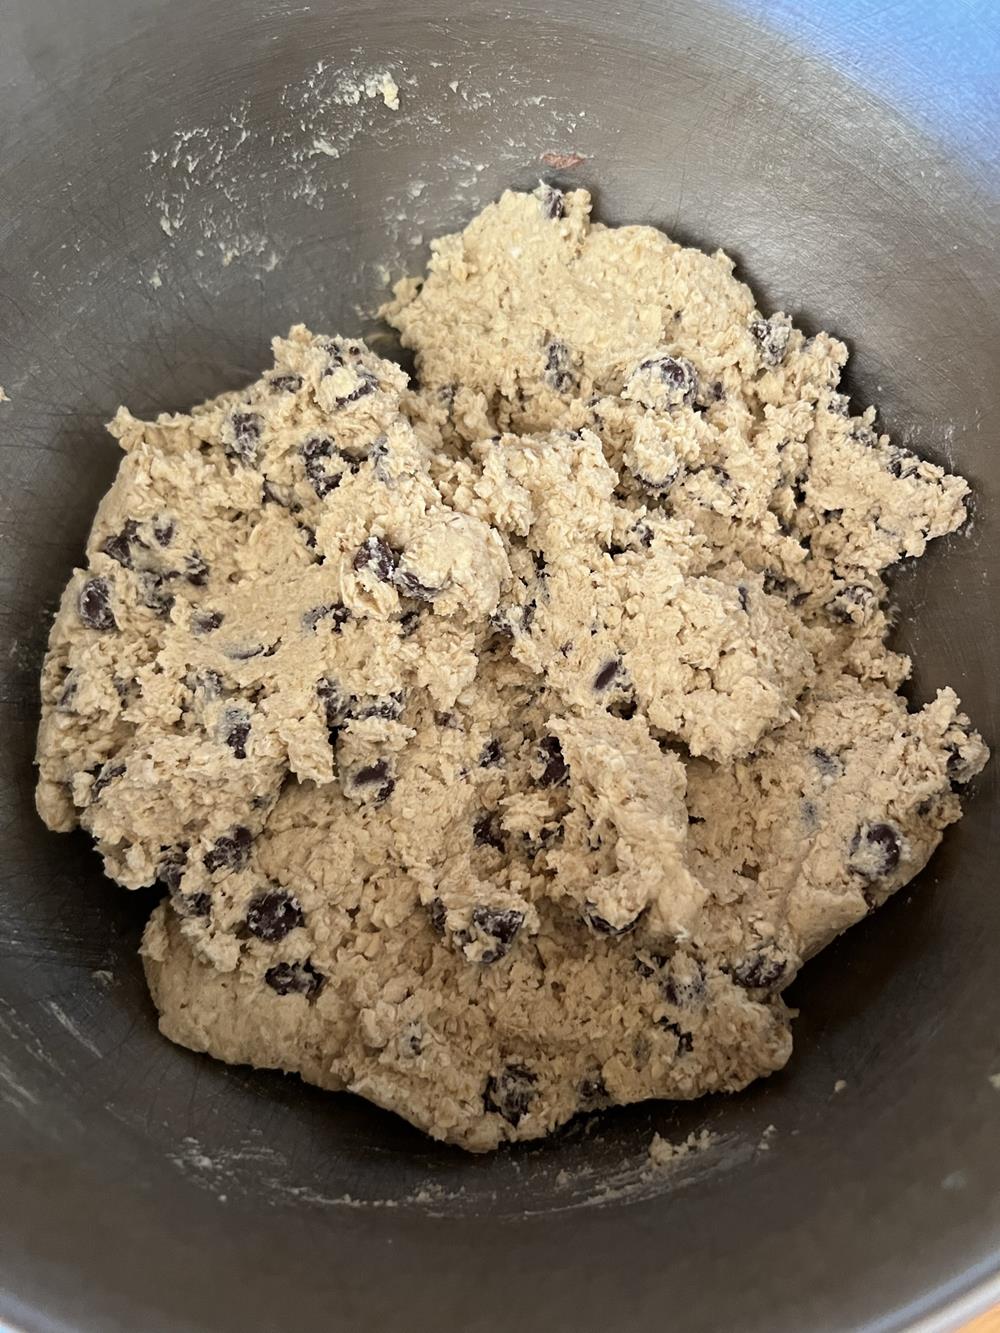 Chocolate Chip Oatmeal Cookie Dough in bowl